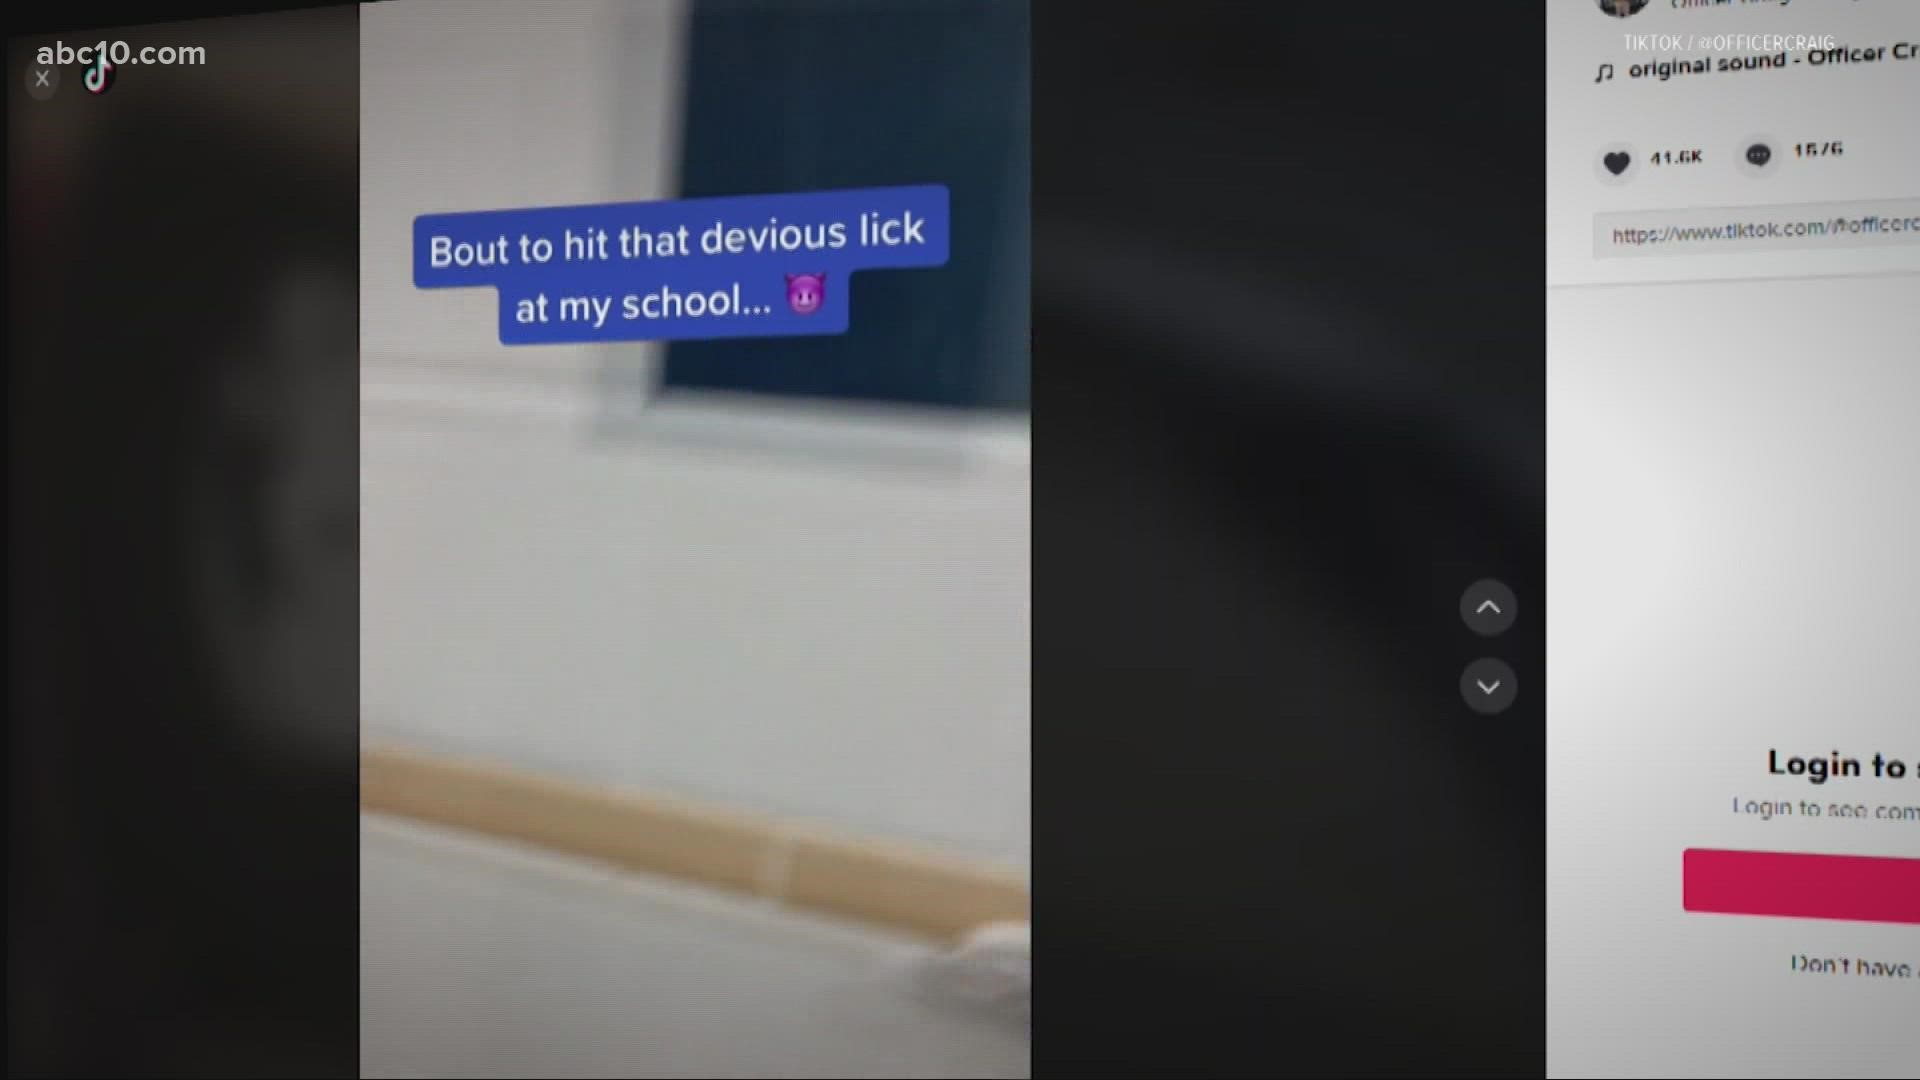 ABC10's Giacomo Luca covers the new "devious licks" Tik Tok challenge, and how it's hurting schools everywhere.